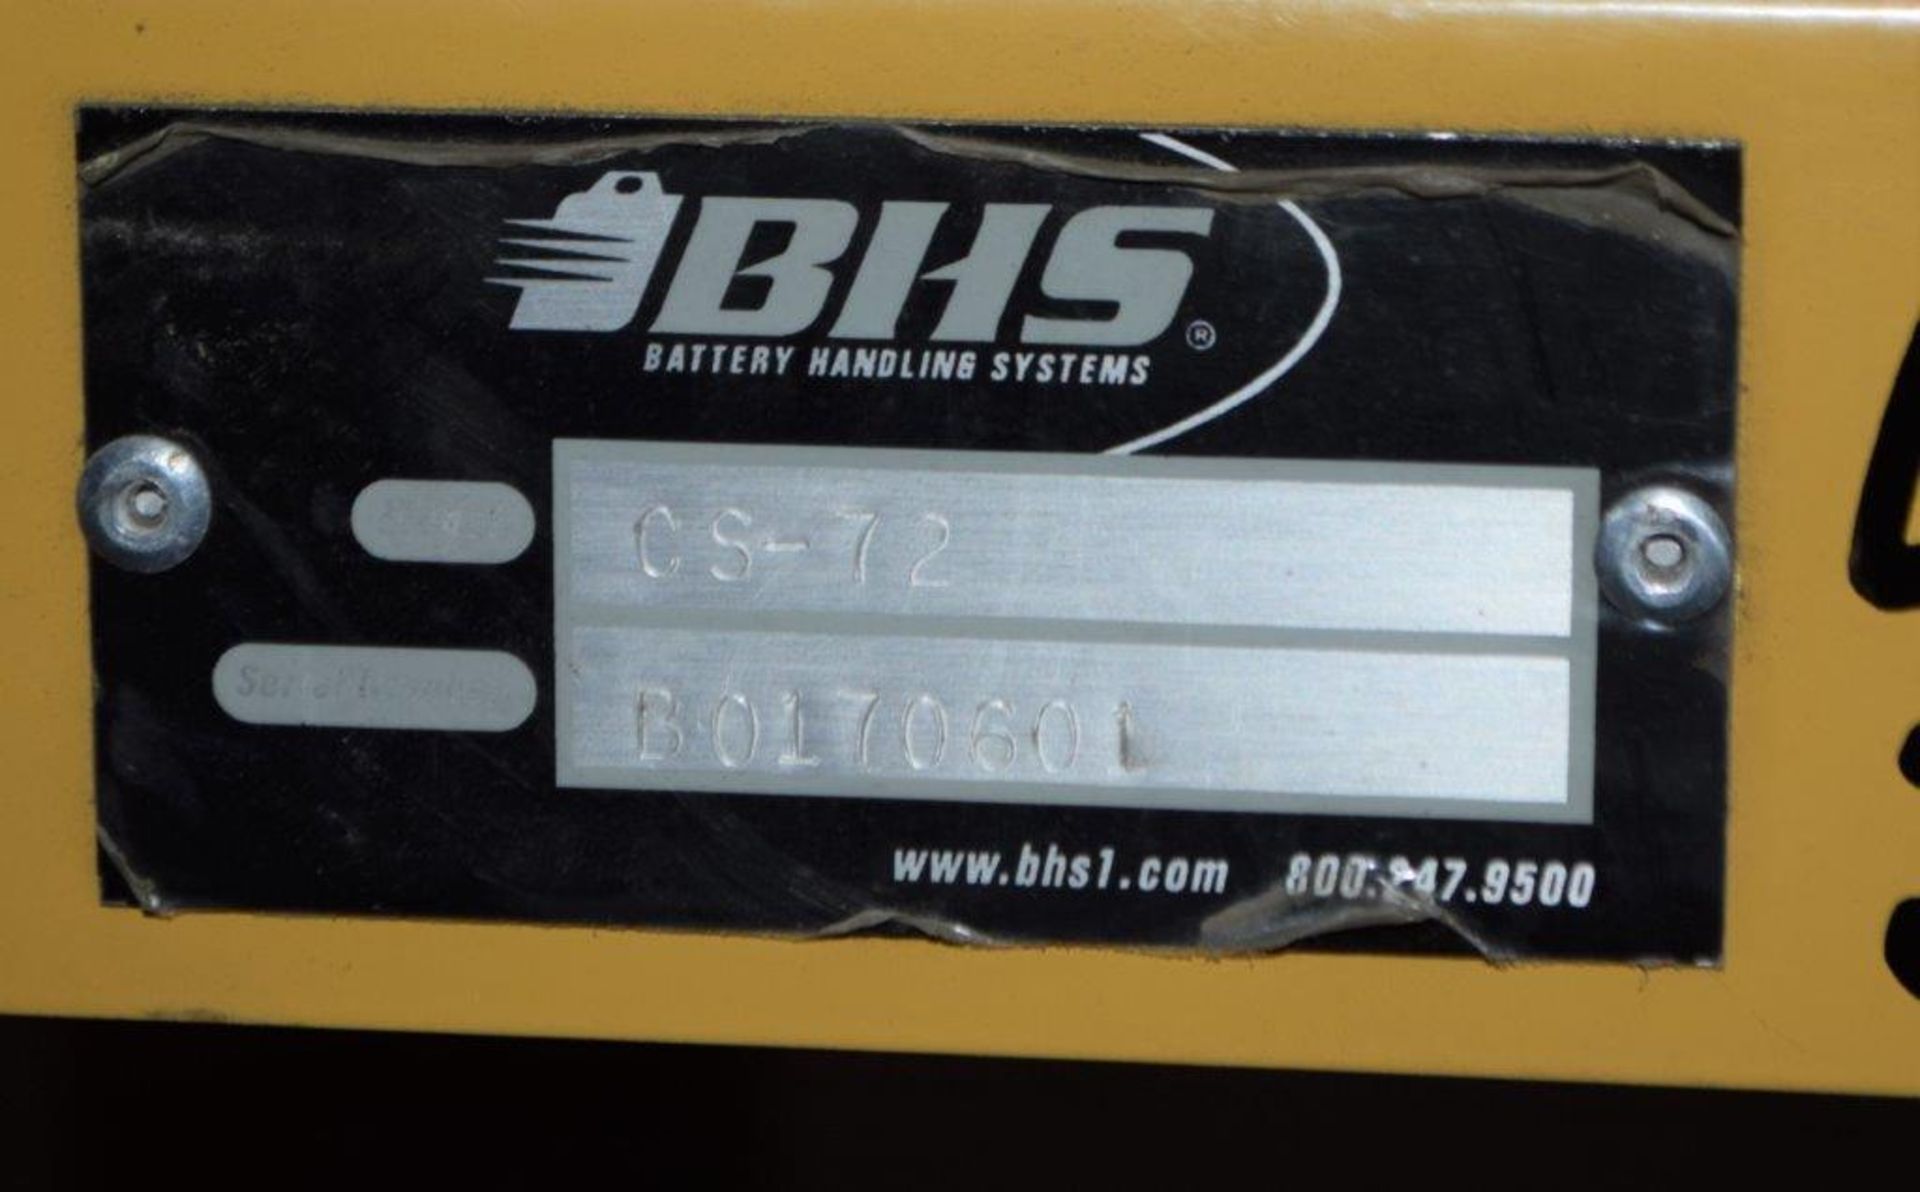 (1) Lot Of (2) BHS Battery Handling Systems Battery Charger Stands, Model CS-72, Serial# B0170601, B - Image 3 of 5